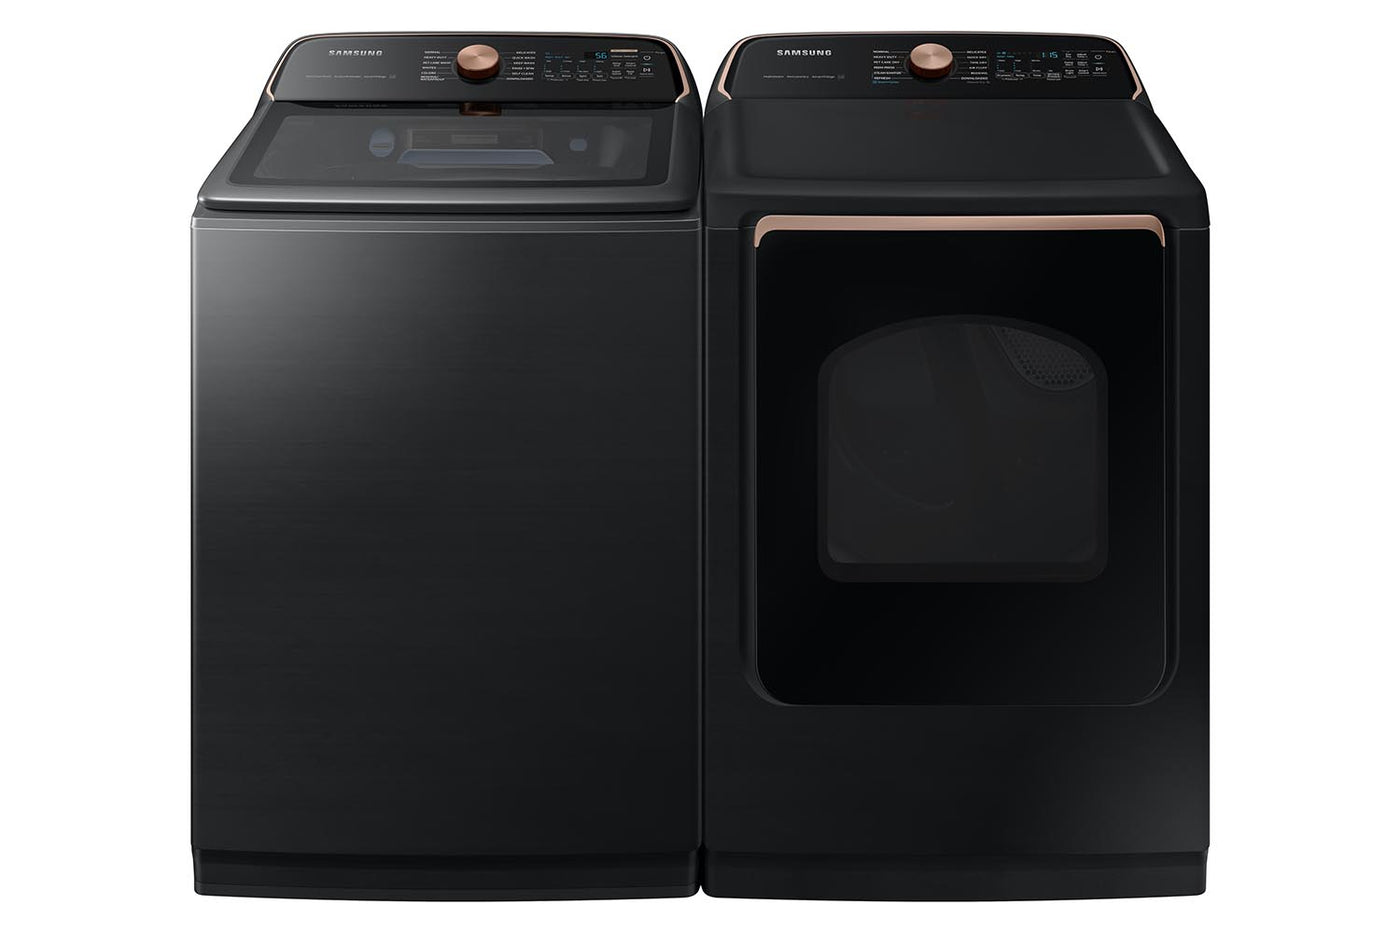 Samsung Black Stainless Smart Electric Dryer with Pet Care Dry (7.4cu.ft) - DVE54CG7550VAC